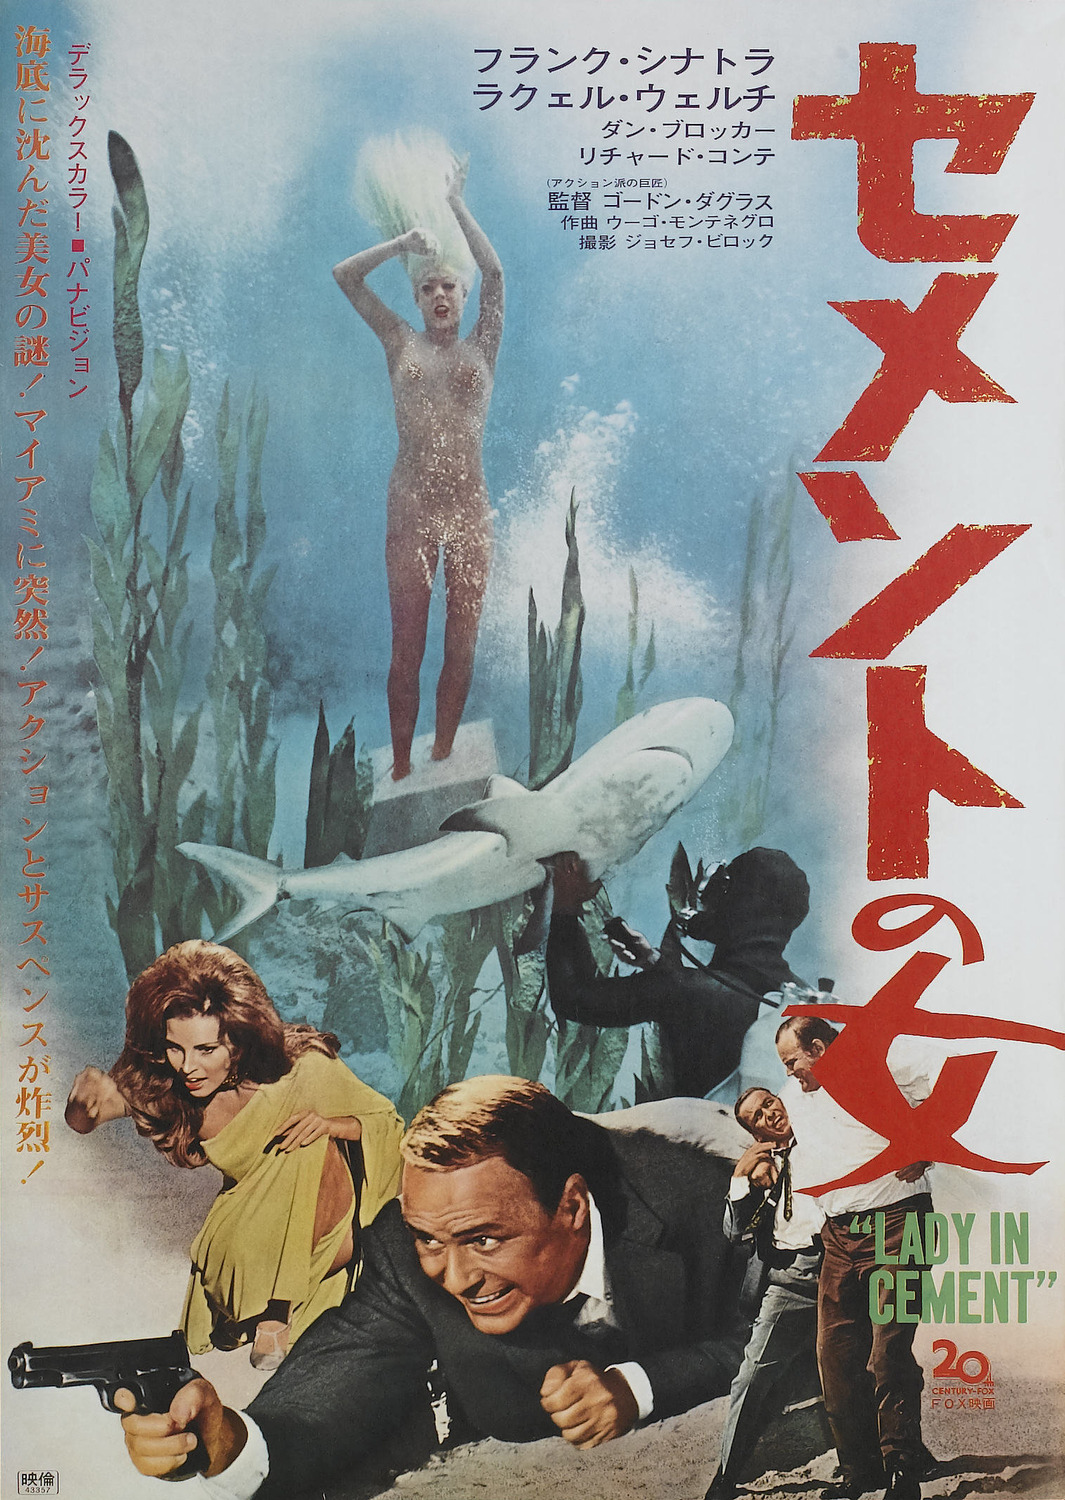 Extra Large Movie Poster Image for Lady in Cement (#6 of 6)